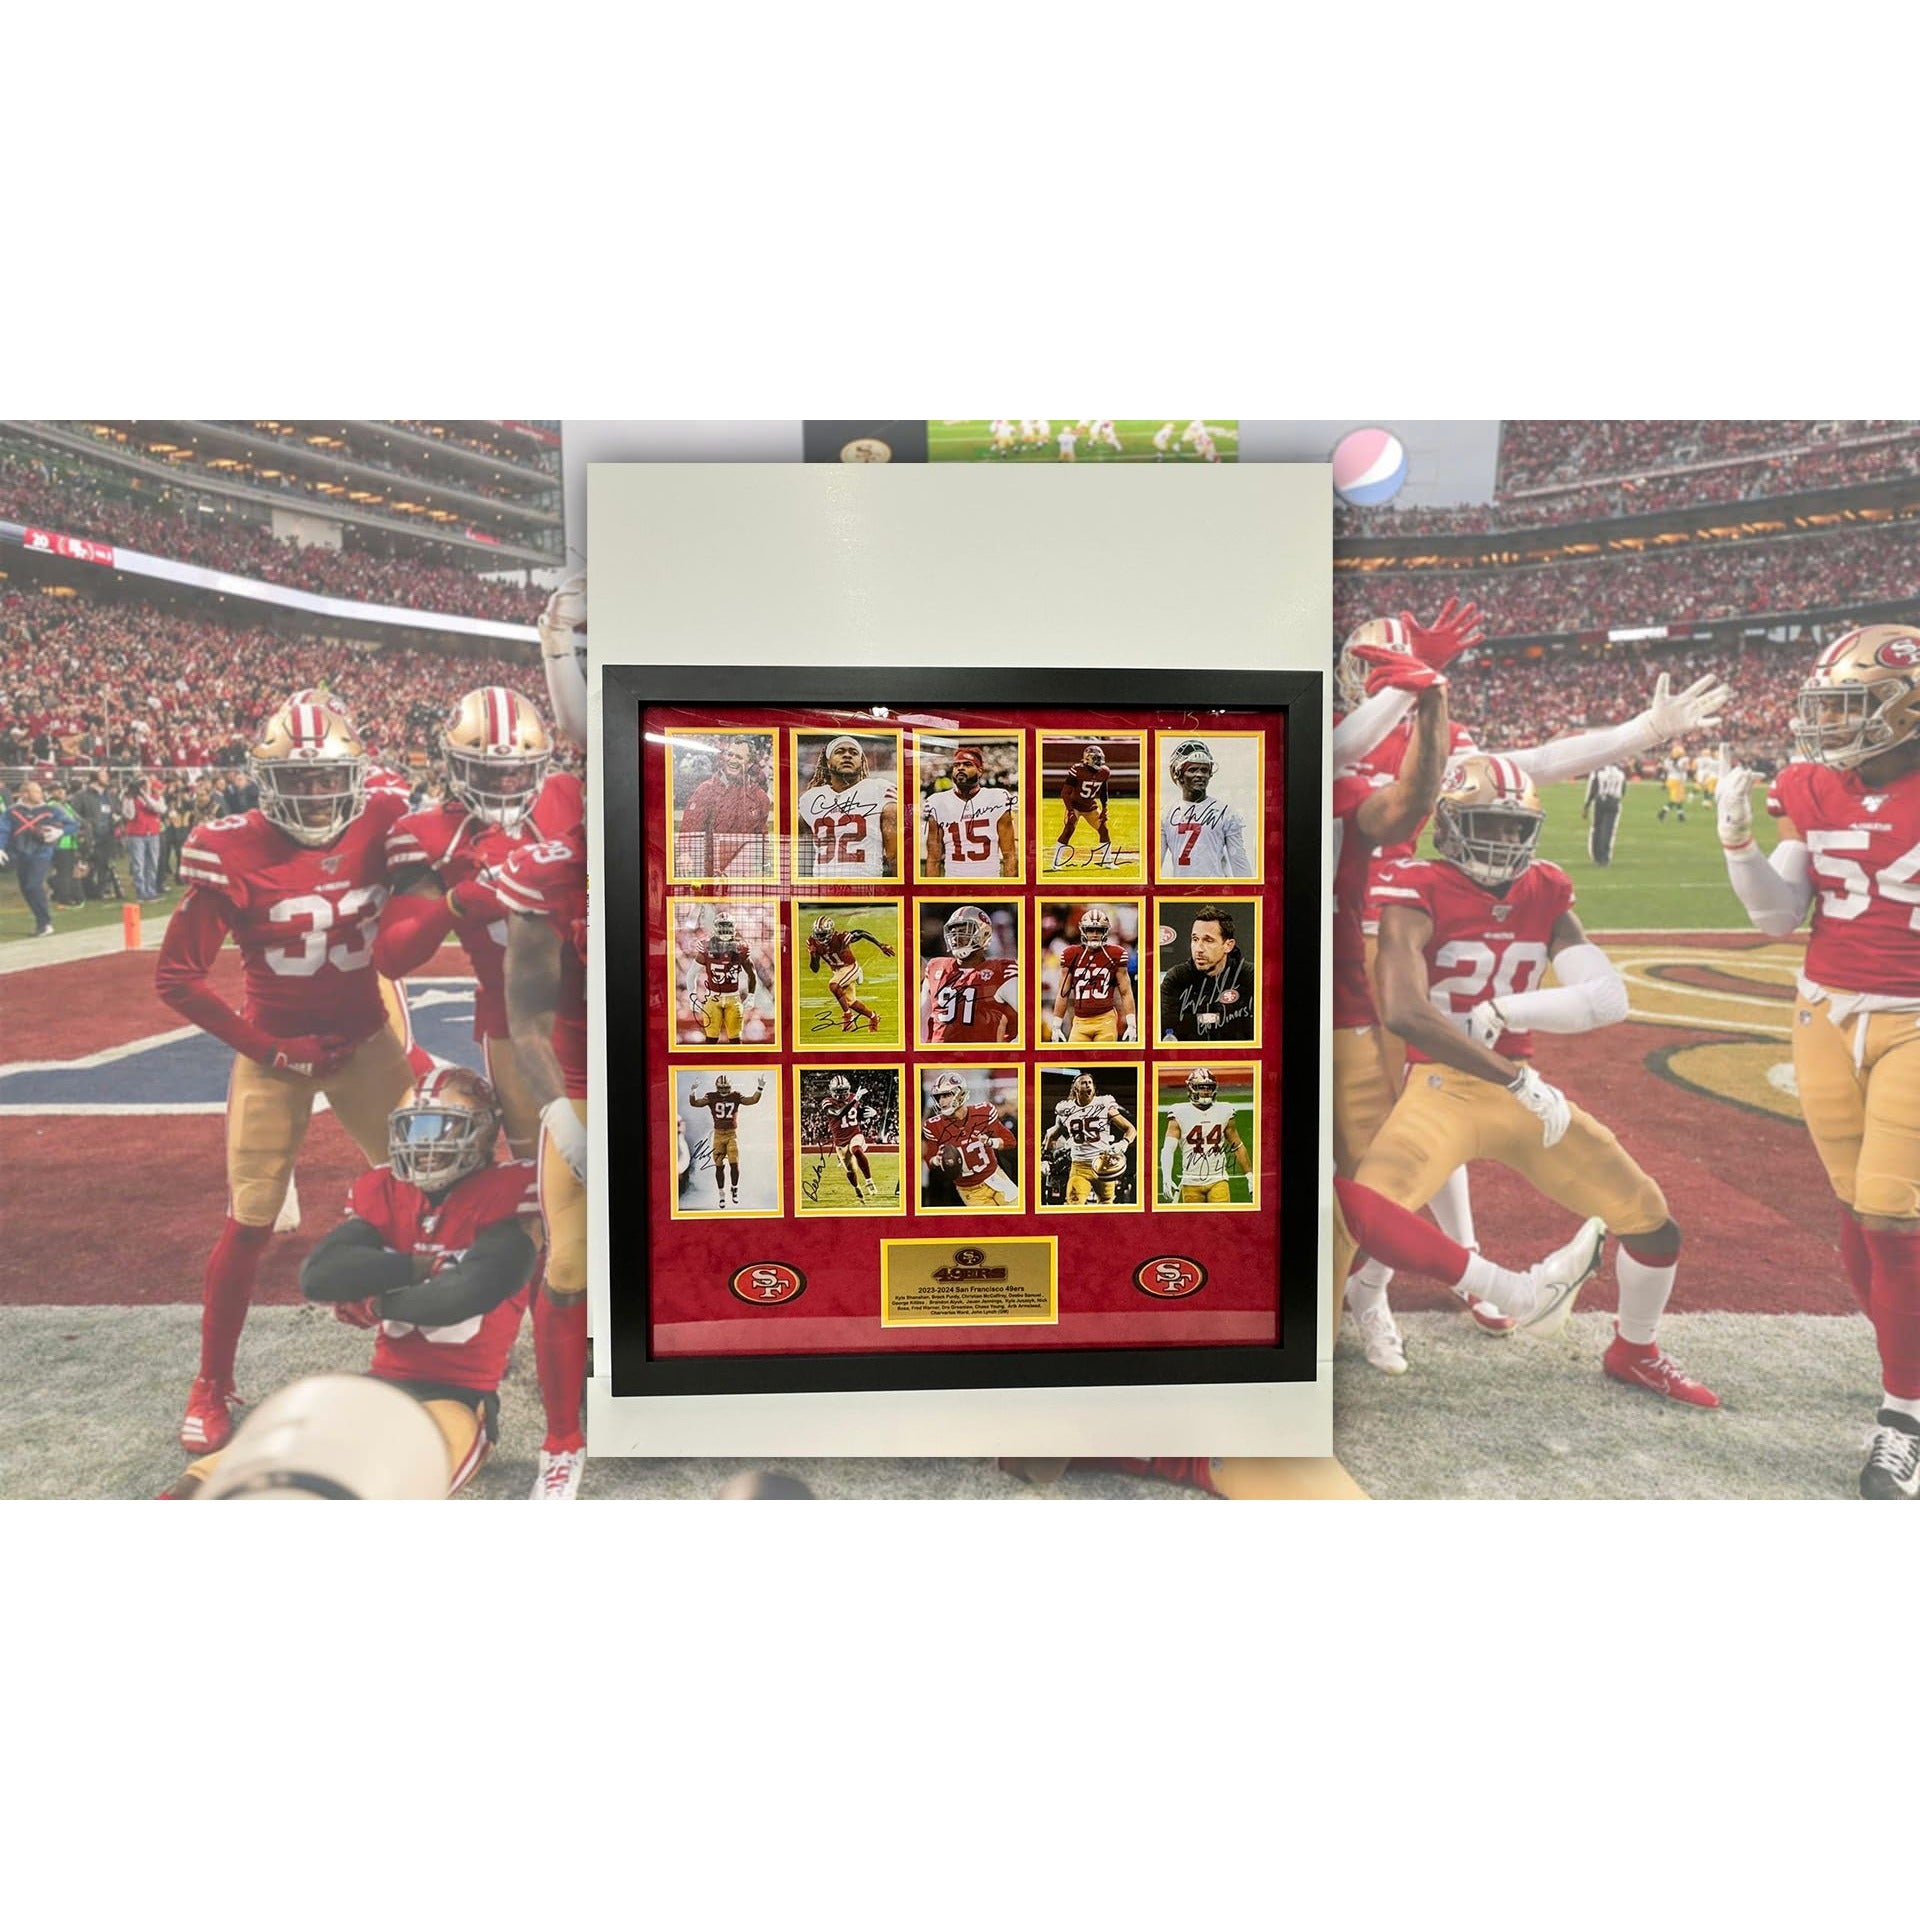 San Francisco 49ers 5x7 photos signed the framed with proof Christian McCaffrey Deebo Samuel George Kittle